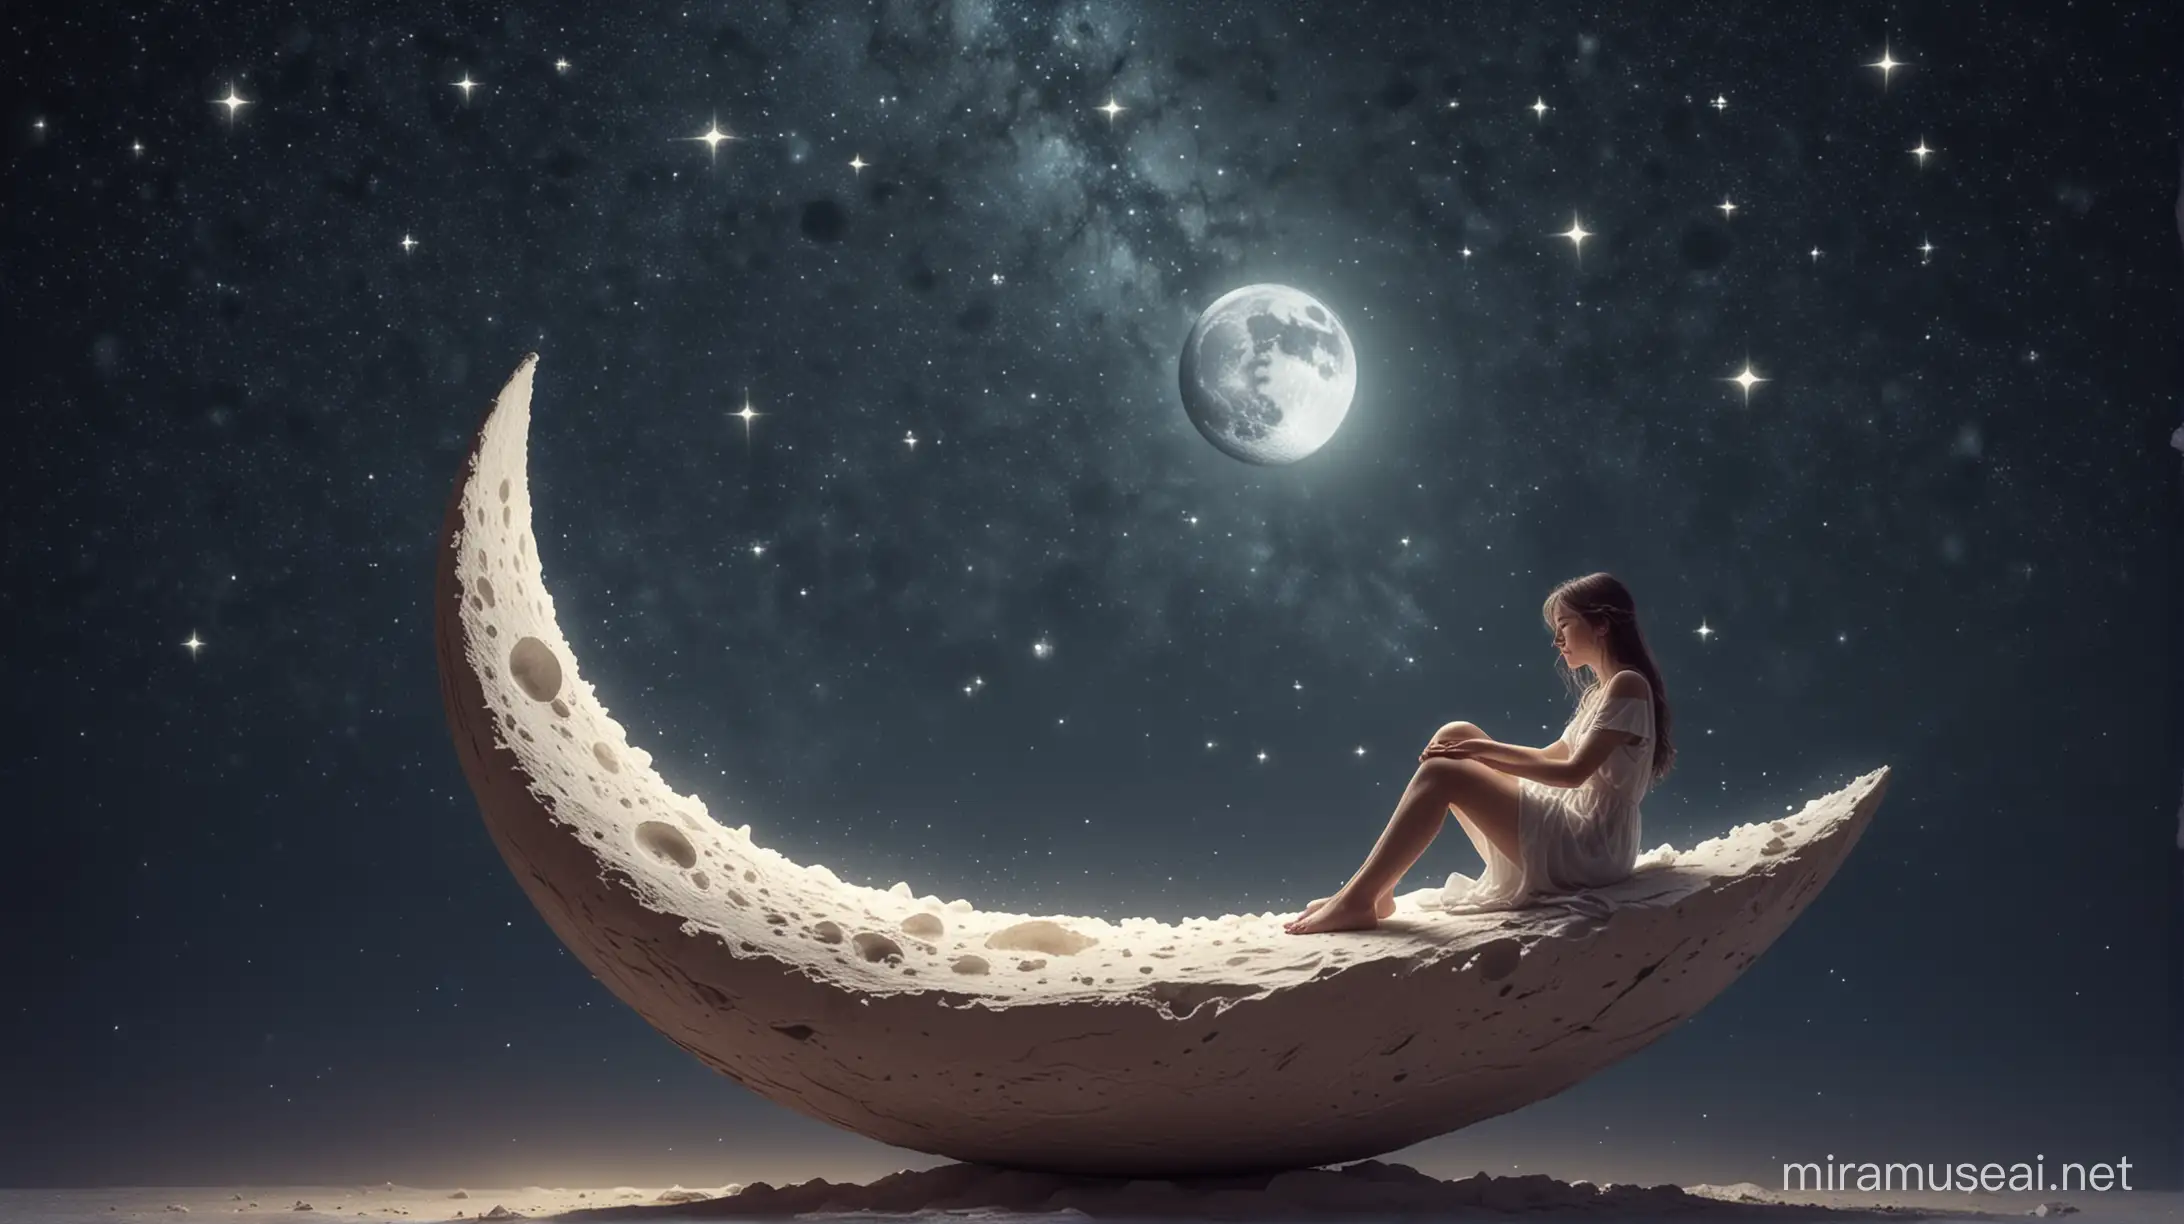 a girl is sitting serene on  a slice of moon,stars are all around delicate tones,serene atmosphere